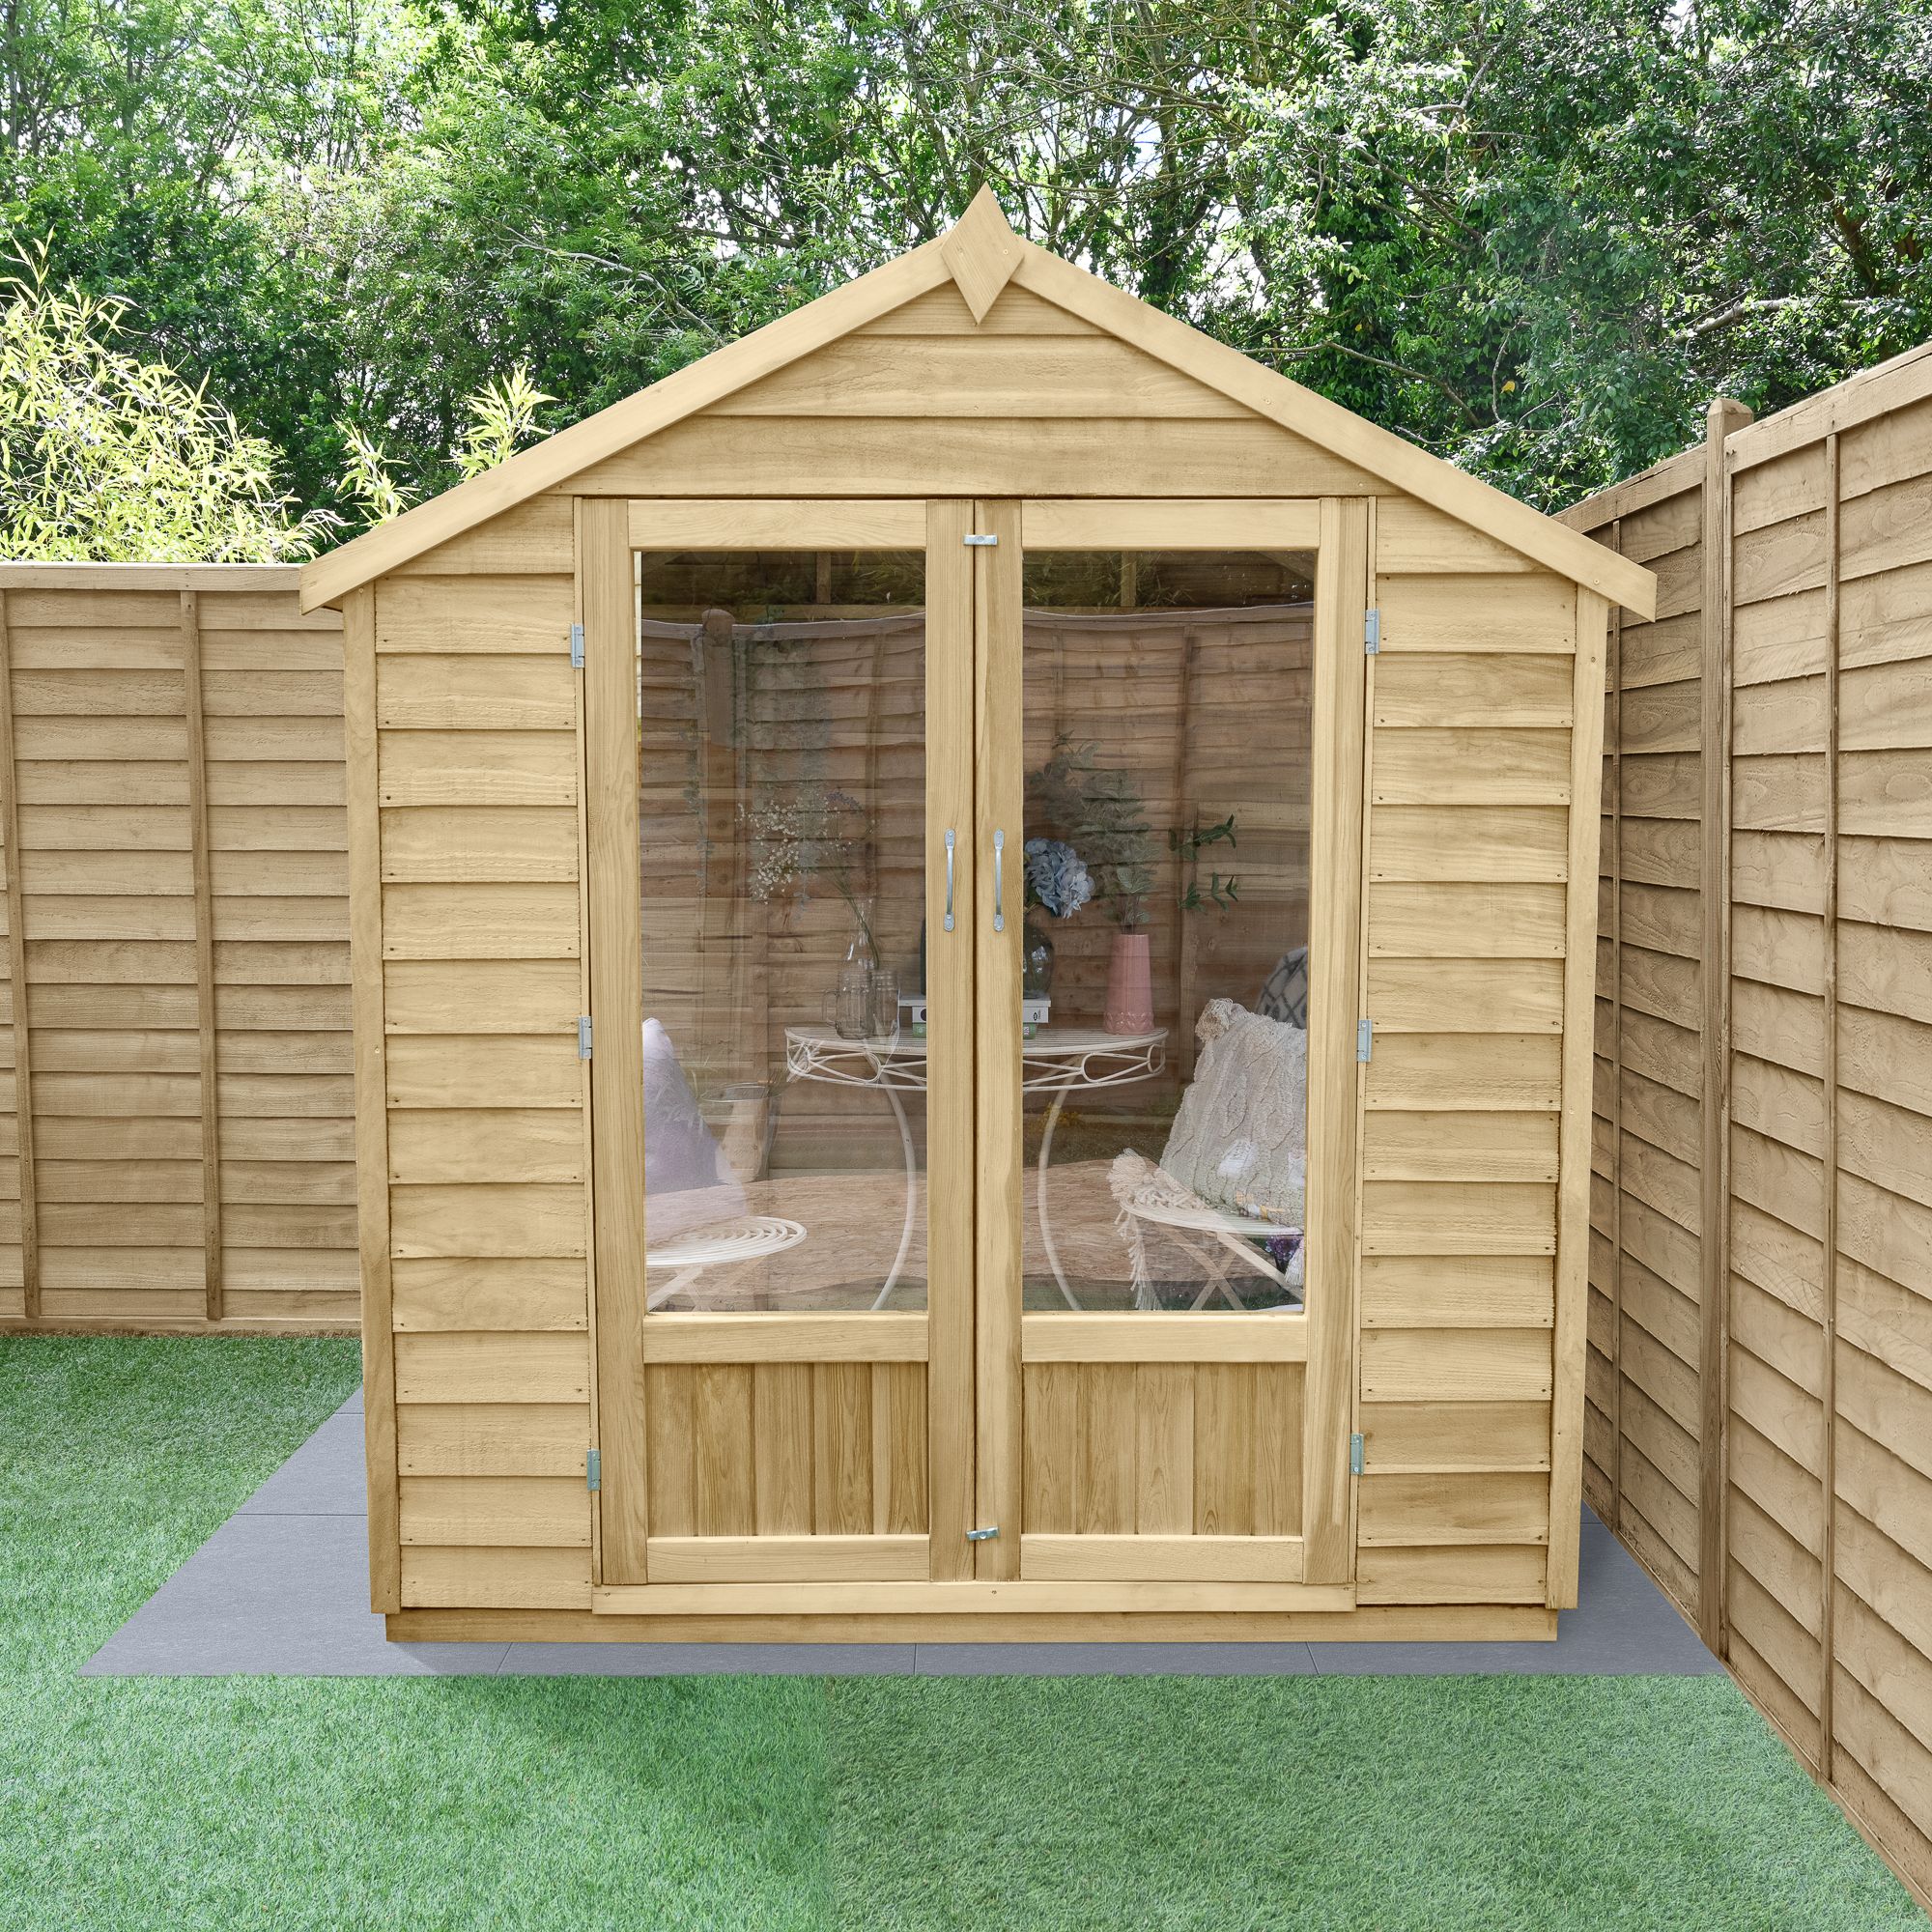 Forest Garden Oakley 6X4 Apex Overlap Solid Wood Summer House With Double Door - Assembly Service Included